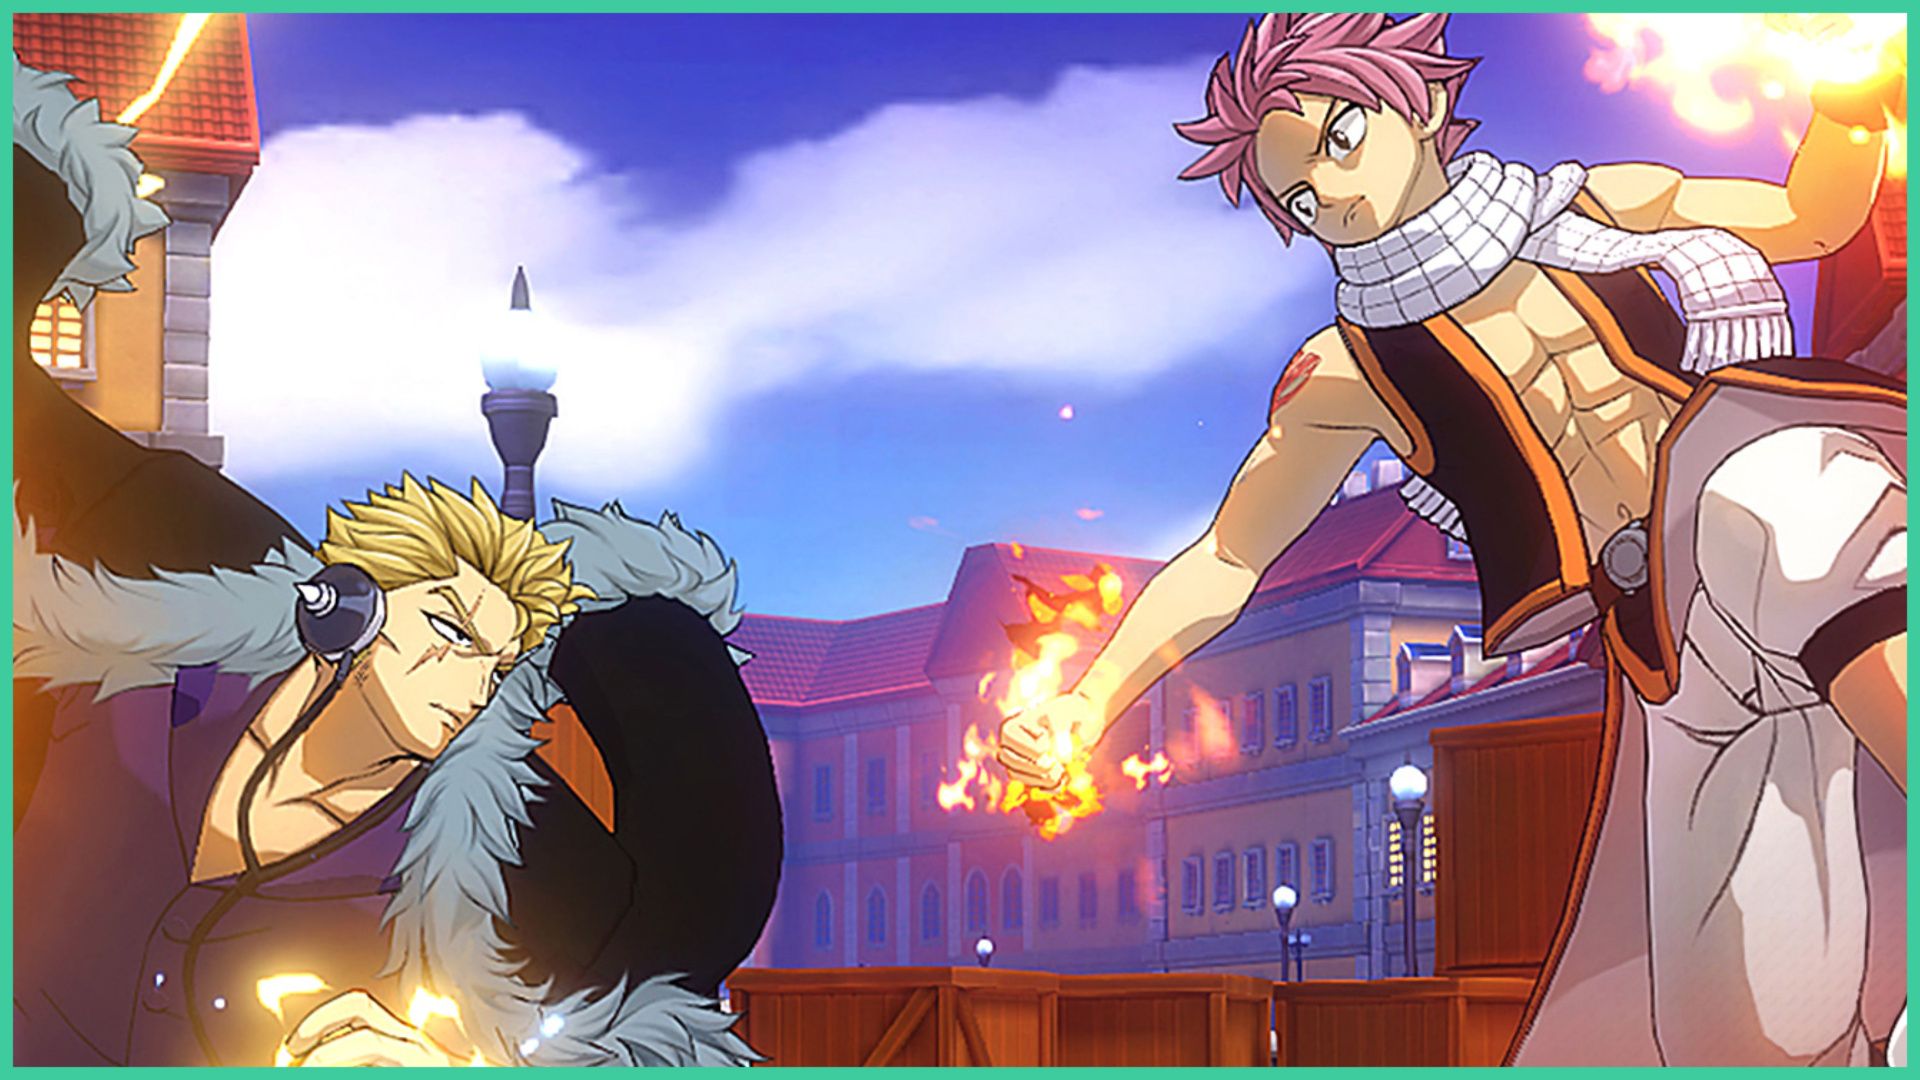 feature image for our fairy tail fierce fight tier list, the image is a screenshot from combat with 2 characters from fairy tail taking part in battle, the character on the right is jumping mid-air with flame fists and a determined expression on his face, as the other is standing on the ground while staring back at him, holding his fist back ready to attack, there are wooden crates behind them as well as a town surrounding them